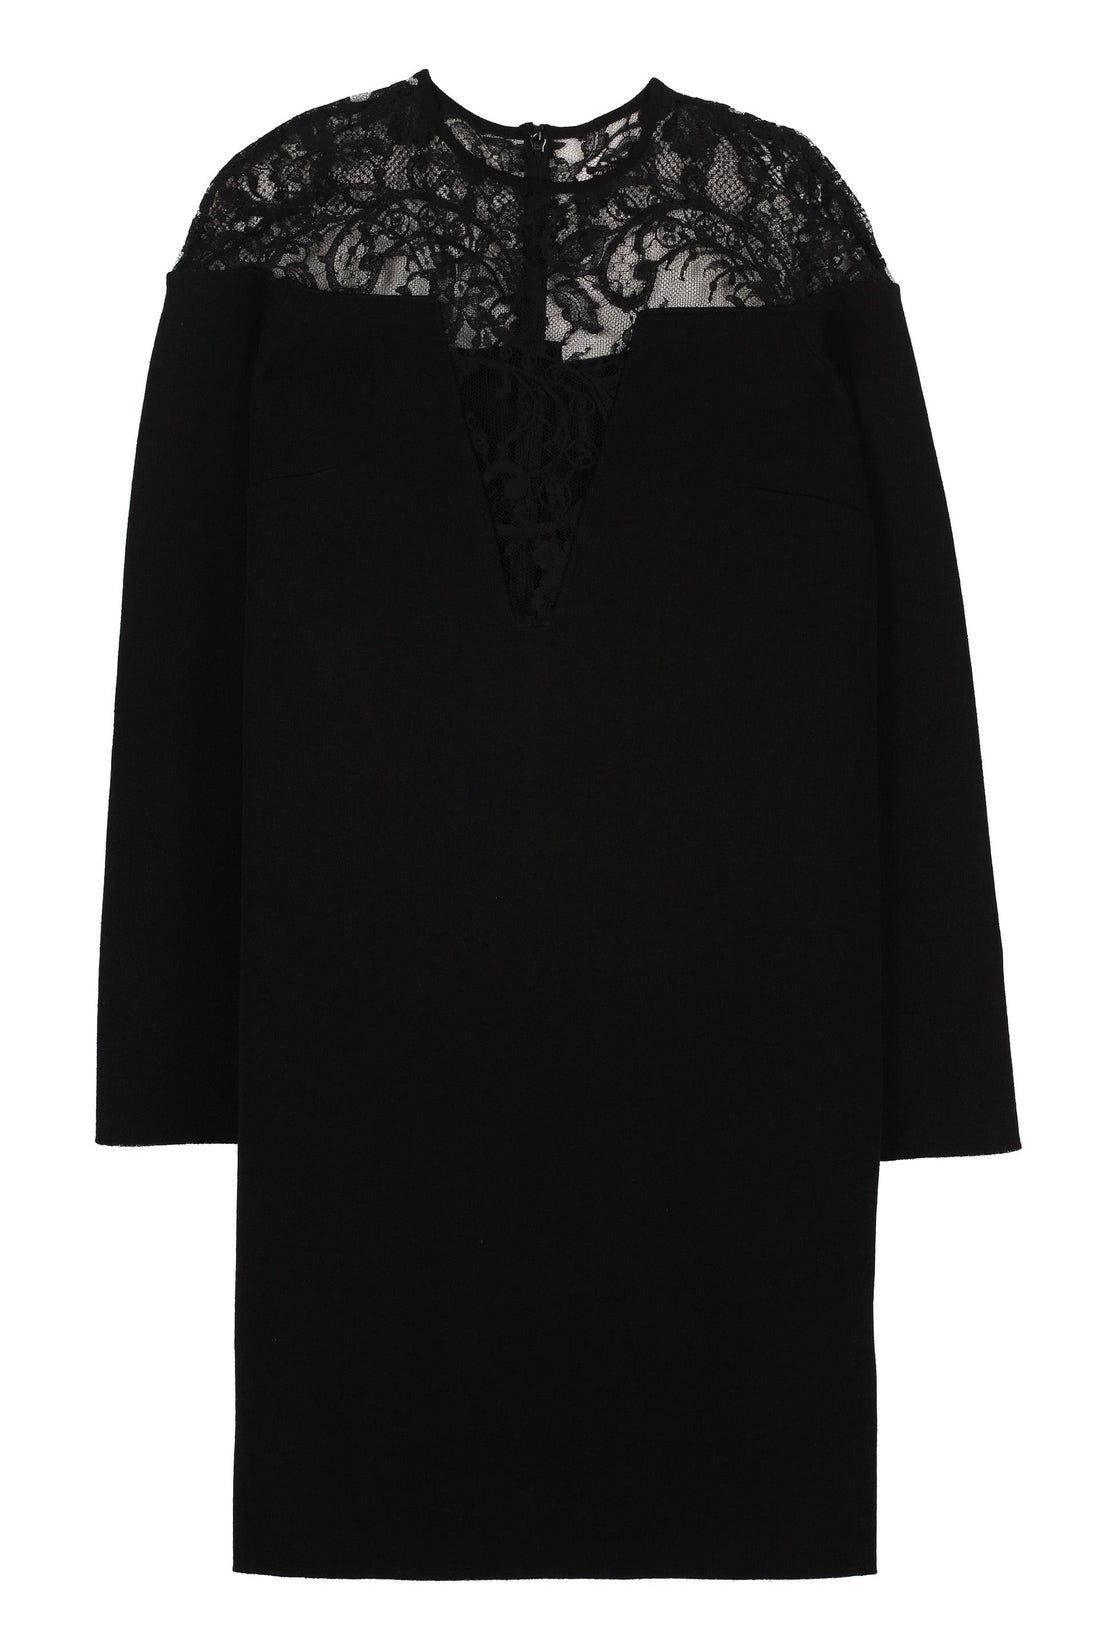 Givenchy-OUTLET-SALE-Lace detail knitted dress-ARCHIVIST